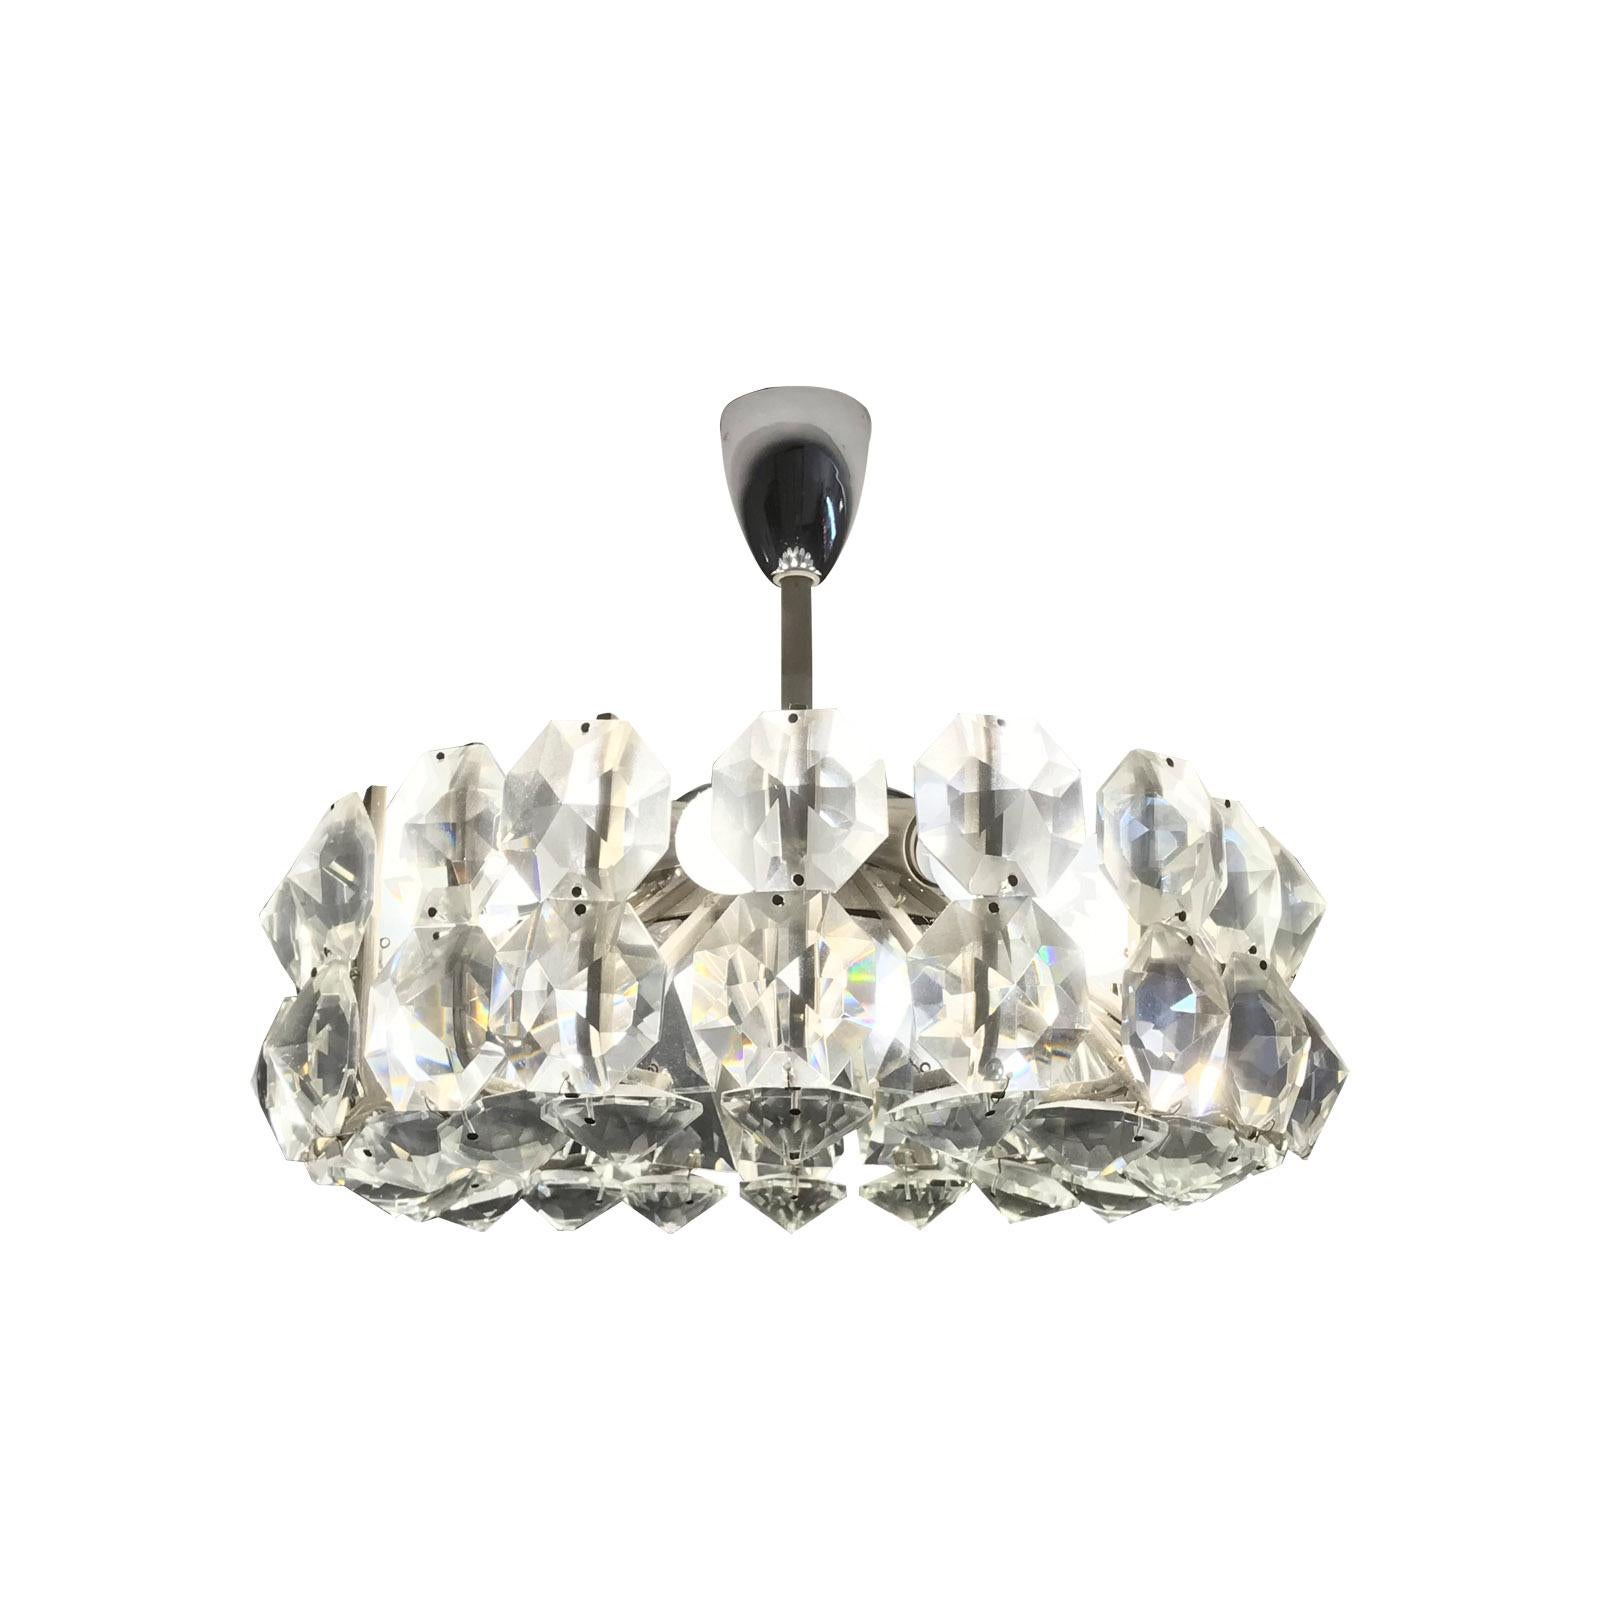 A significant Bakalowits chandelier from 1960 with a mirror on the bottom and very large glass-stones
Total drop custom made
Suitable for US.
 